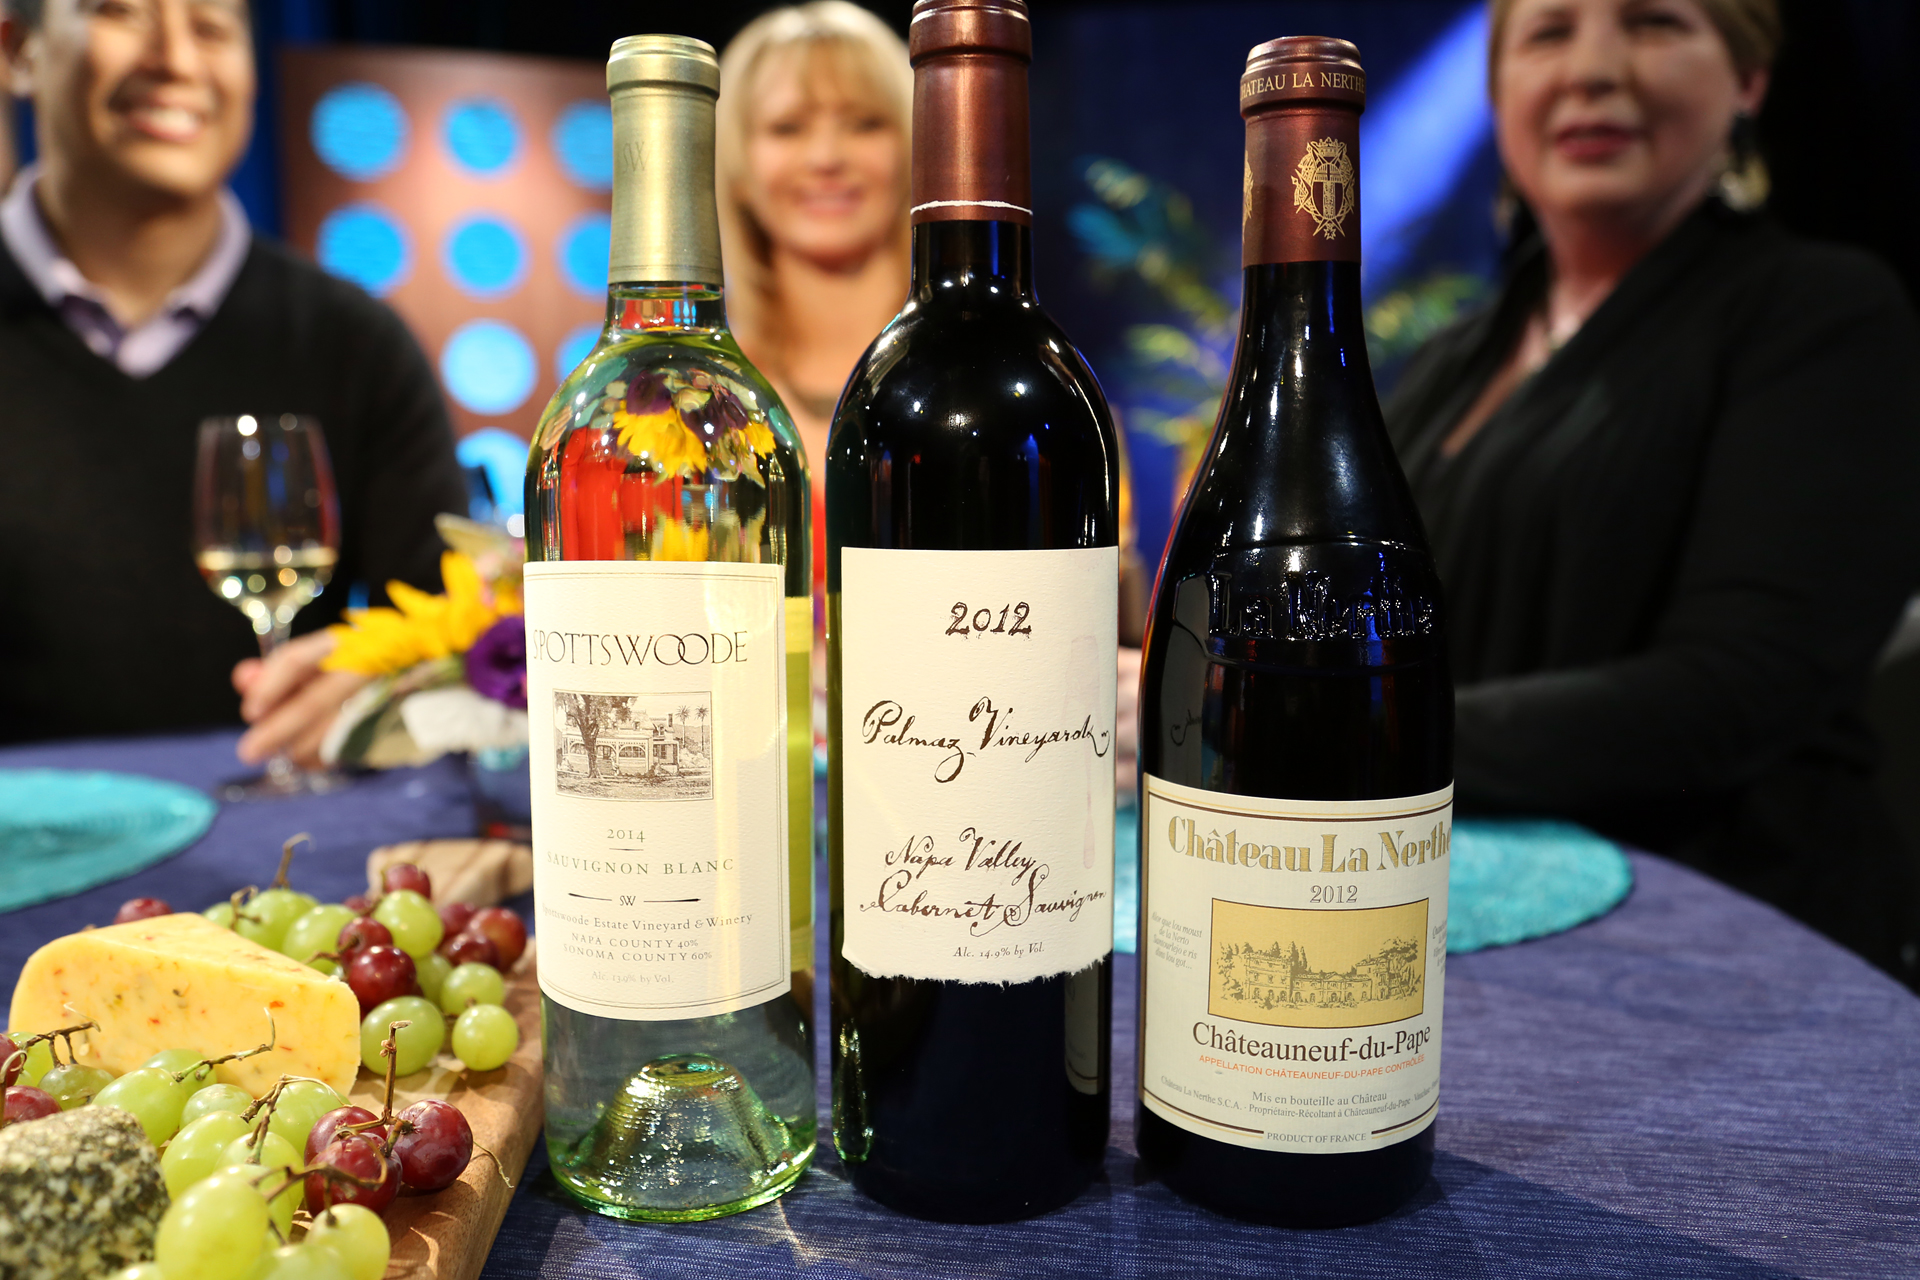 Wines that guests drank on the set of the premiere episode of season 11.